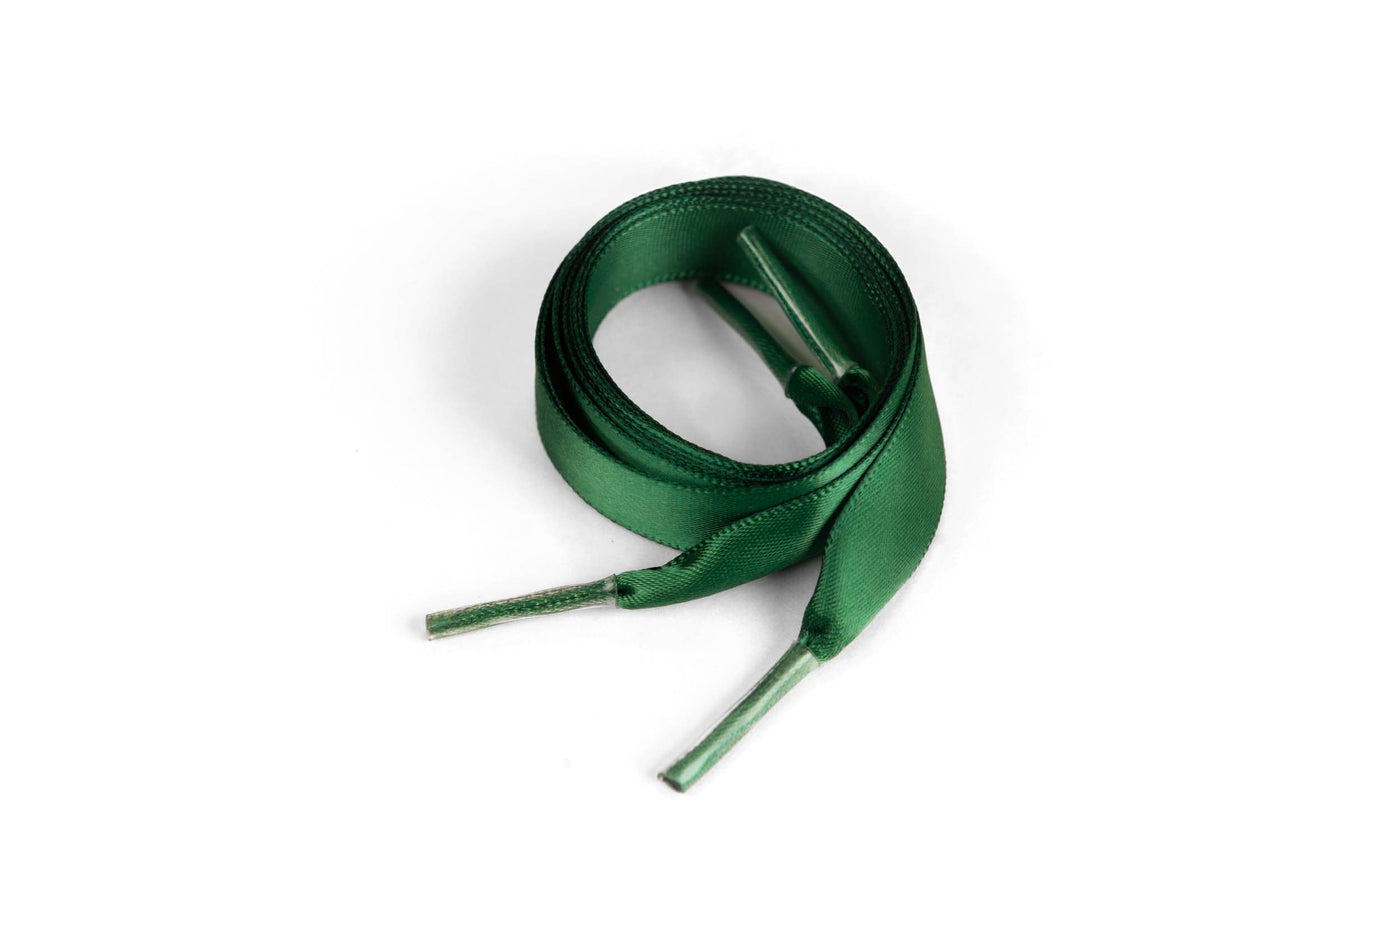 Satin Ribbon 5/8" Premium Quality Shoelaces - 54" Inch Length Forest Green